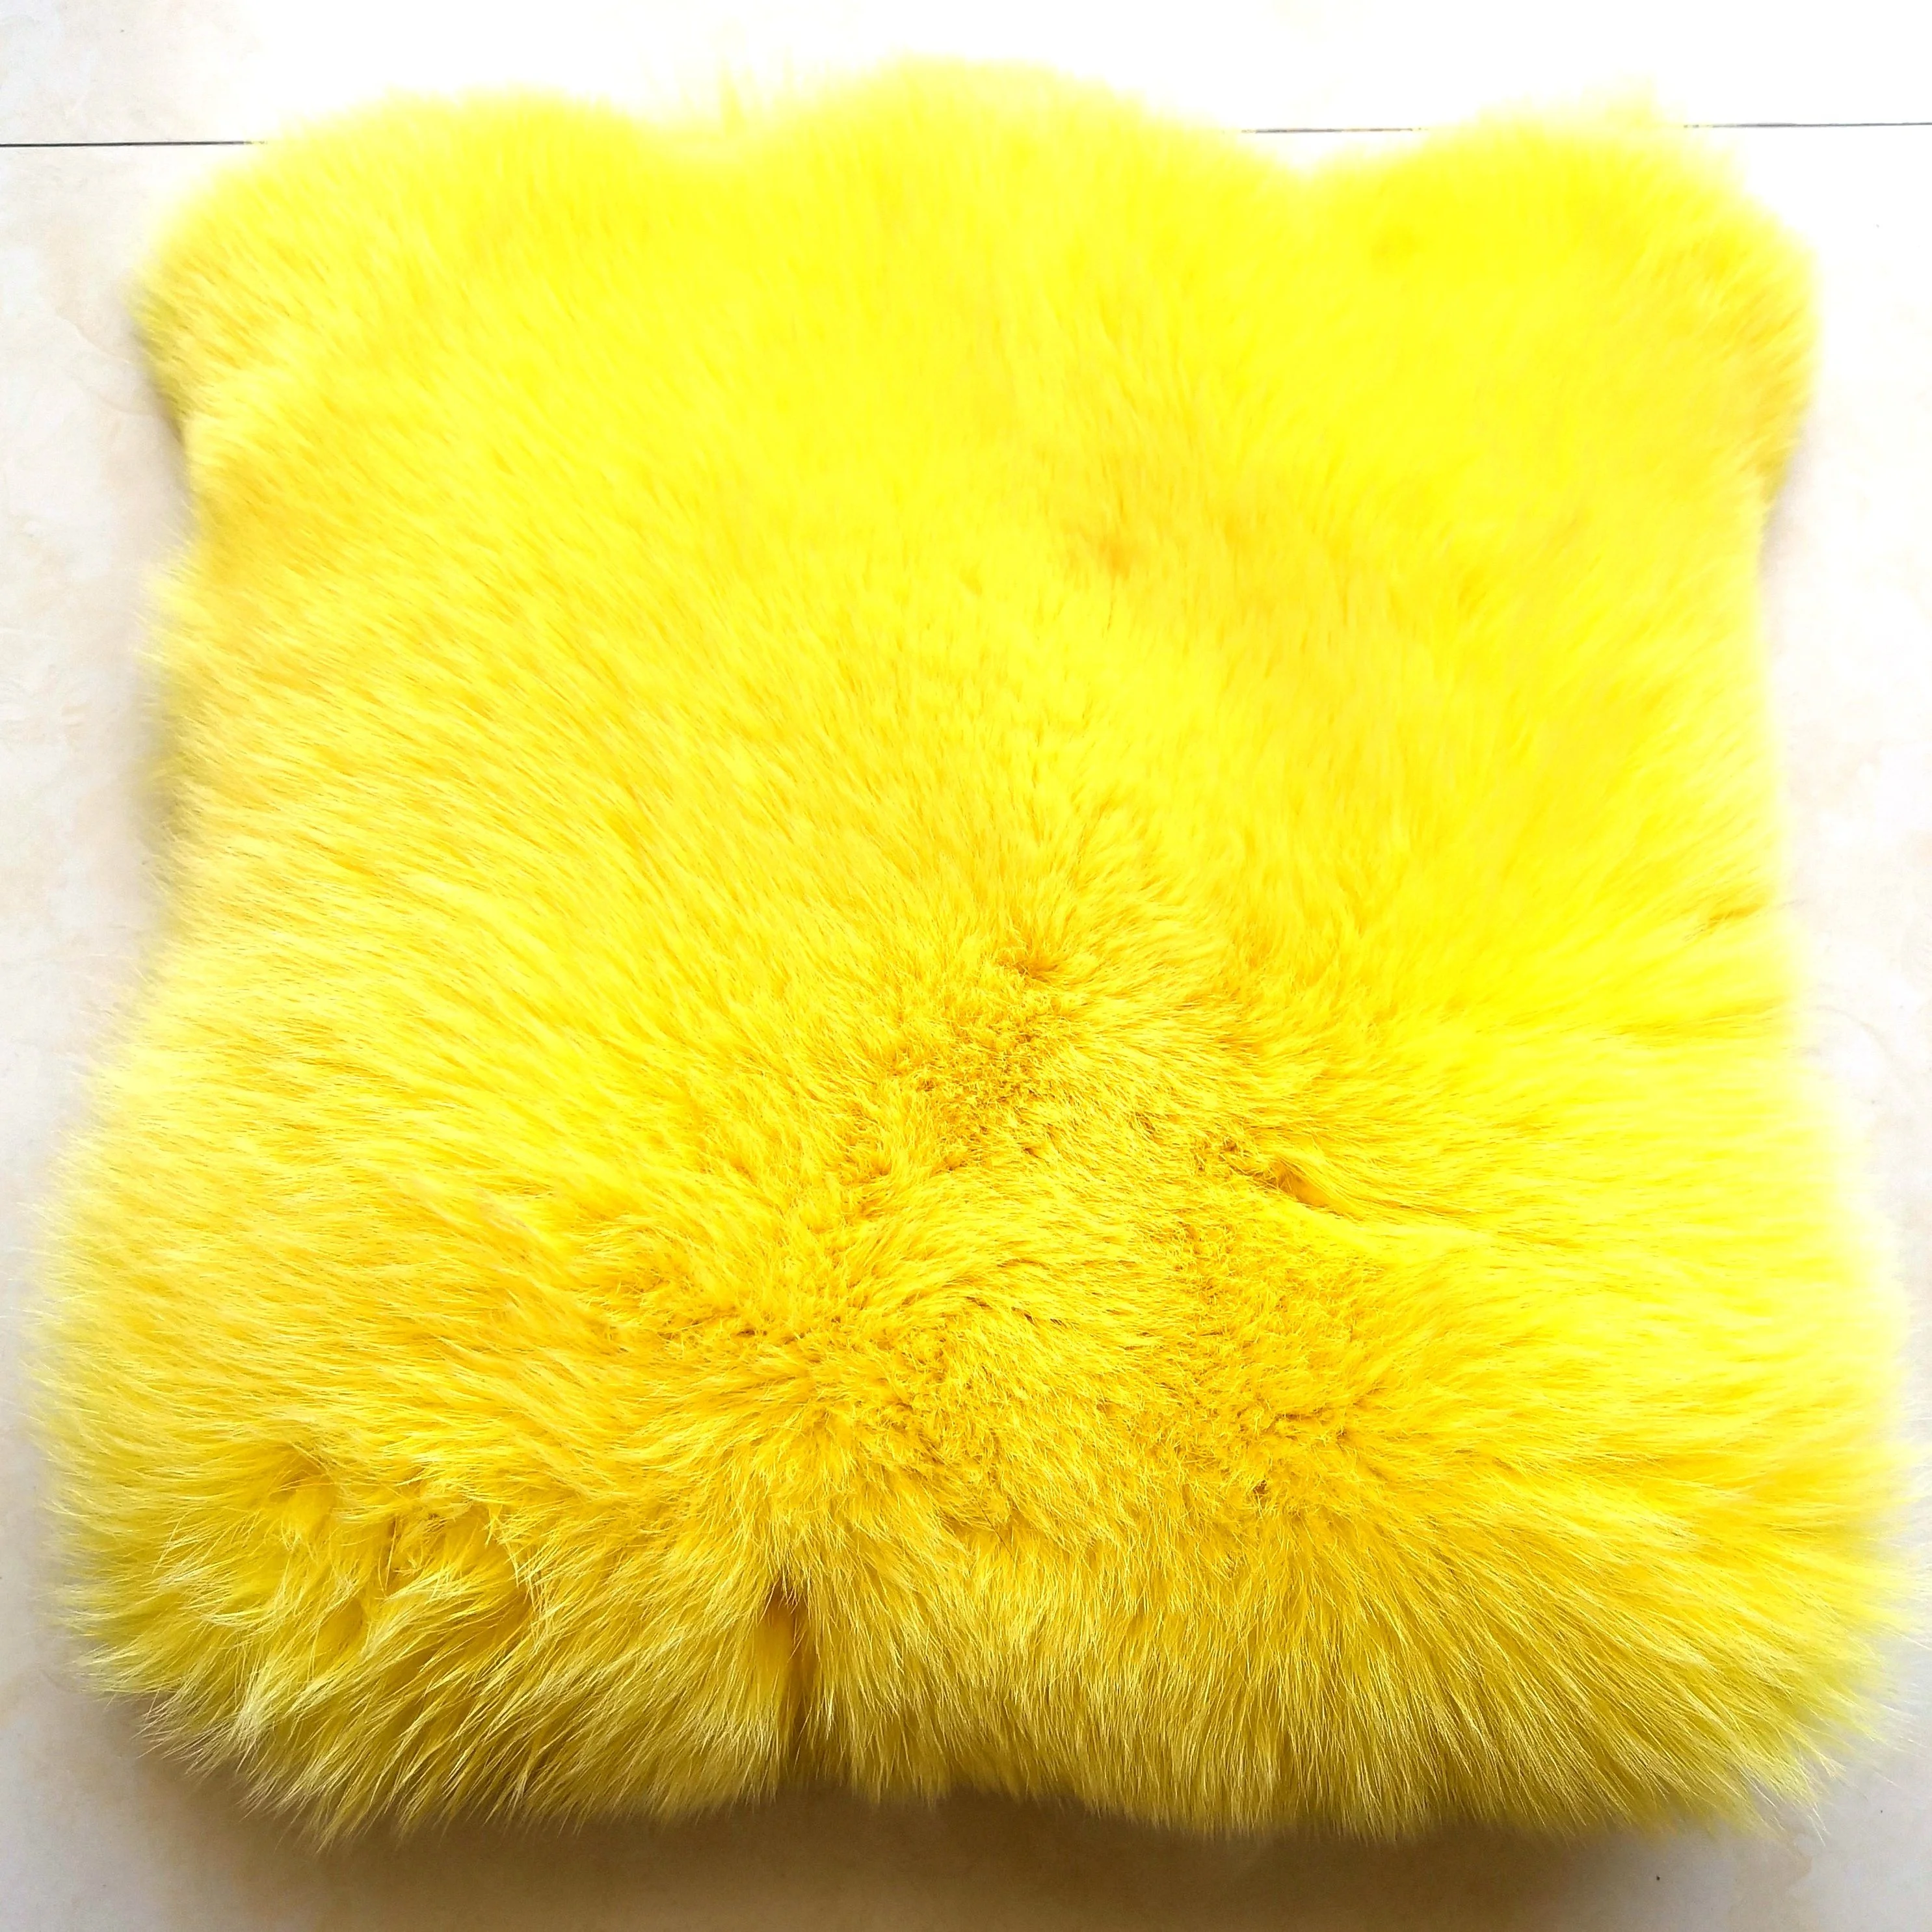 Natural Fur 100% Products Made From Animal Skin Hide And Skin Animal - Buy Animal  Skin,Animal Hide And Skin,Products Made From Animal Skin Product on  